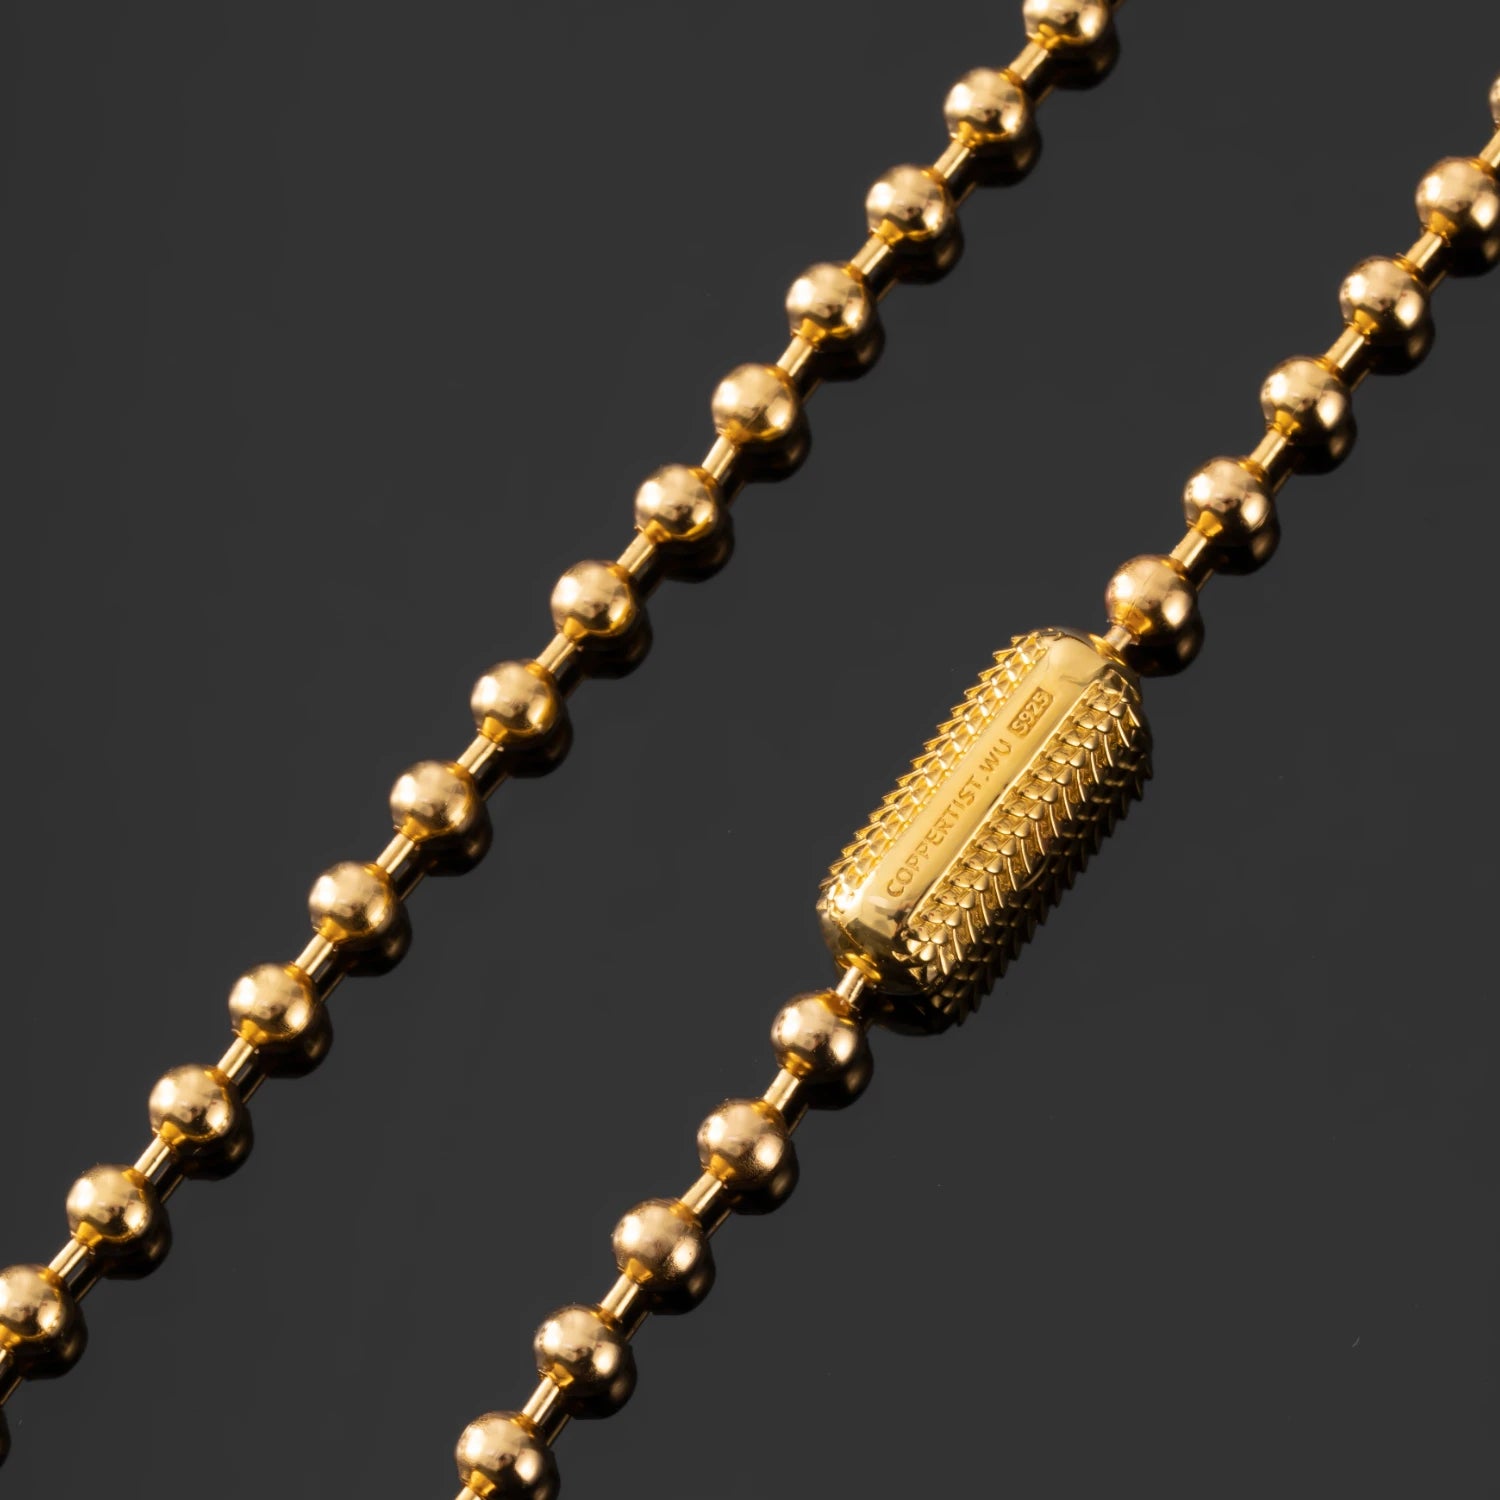 Snake Scale Ball Chain Necklace - 4mm Gold Vermeil